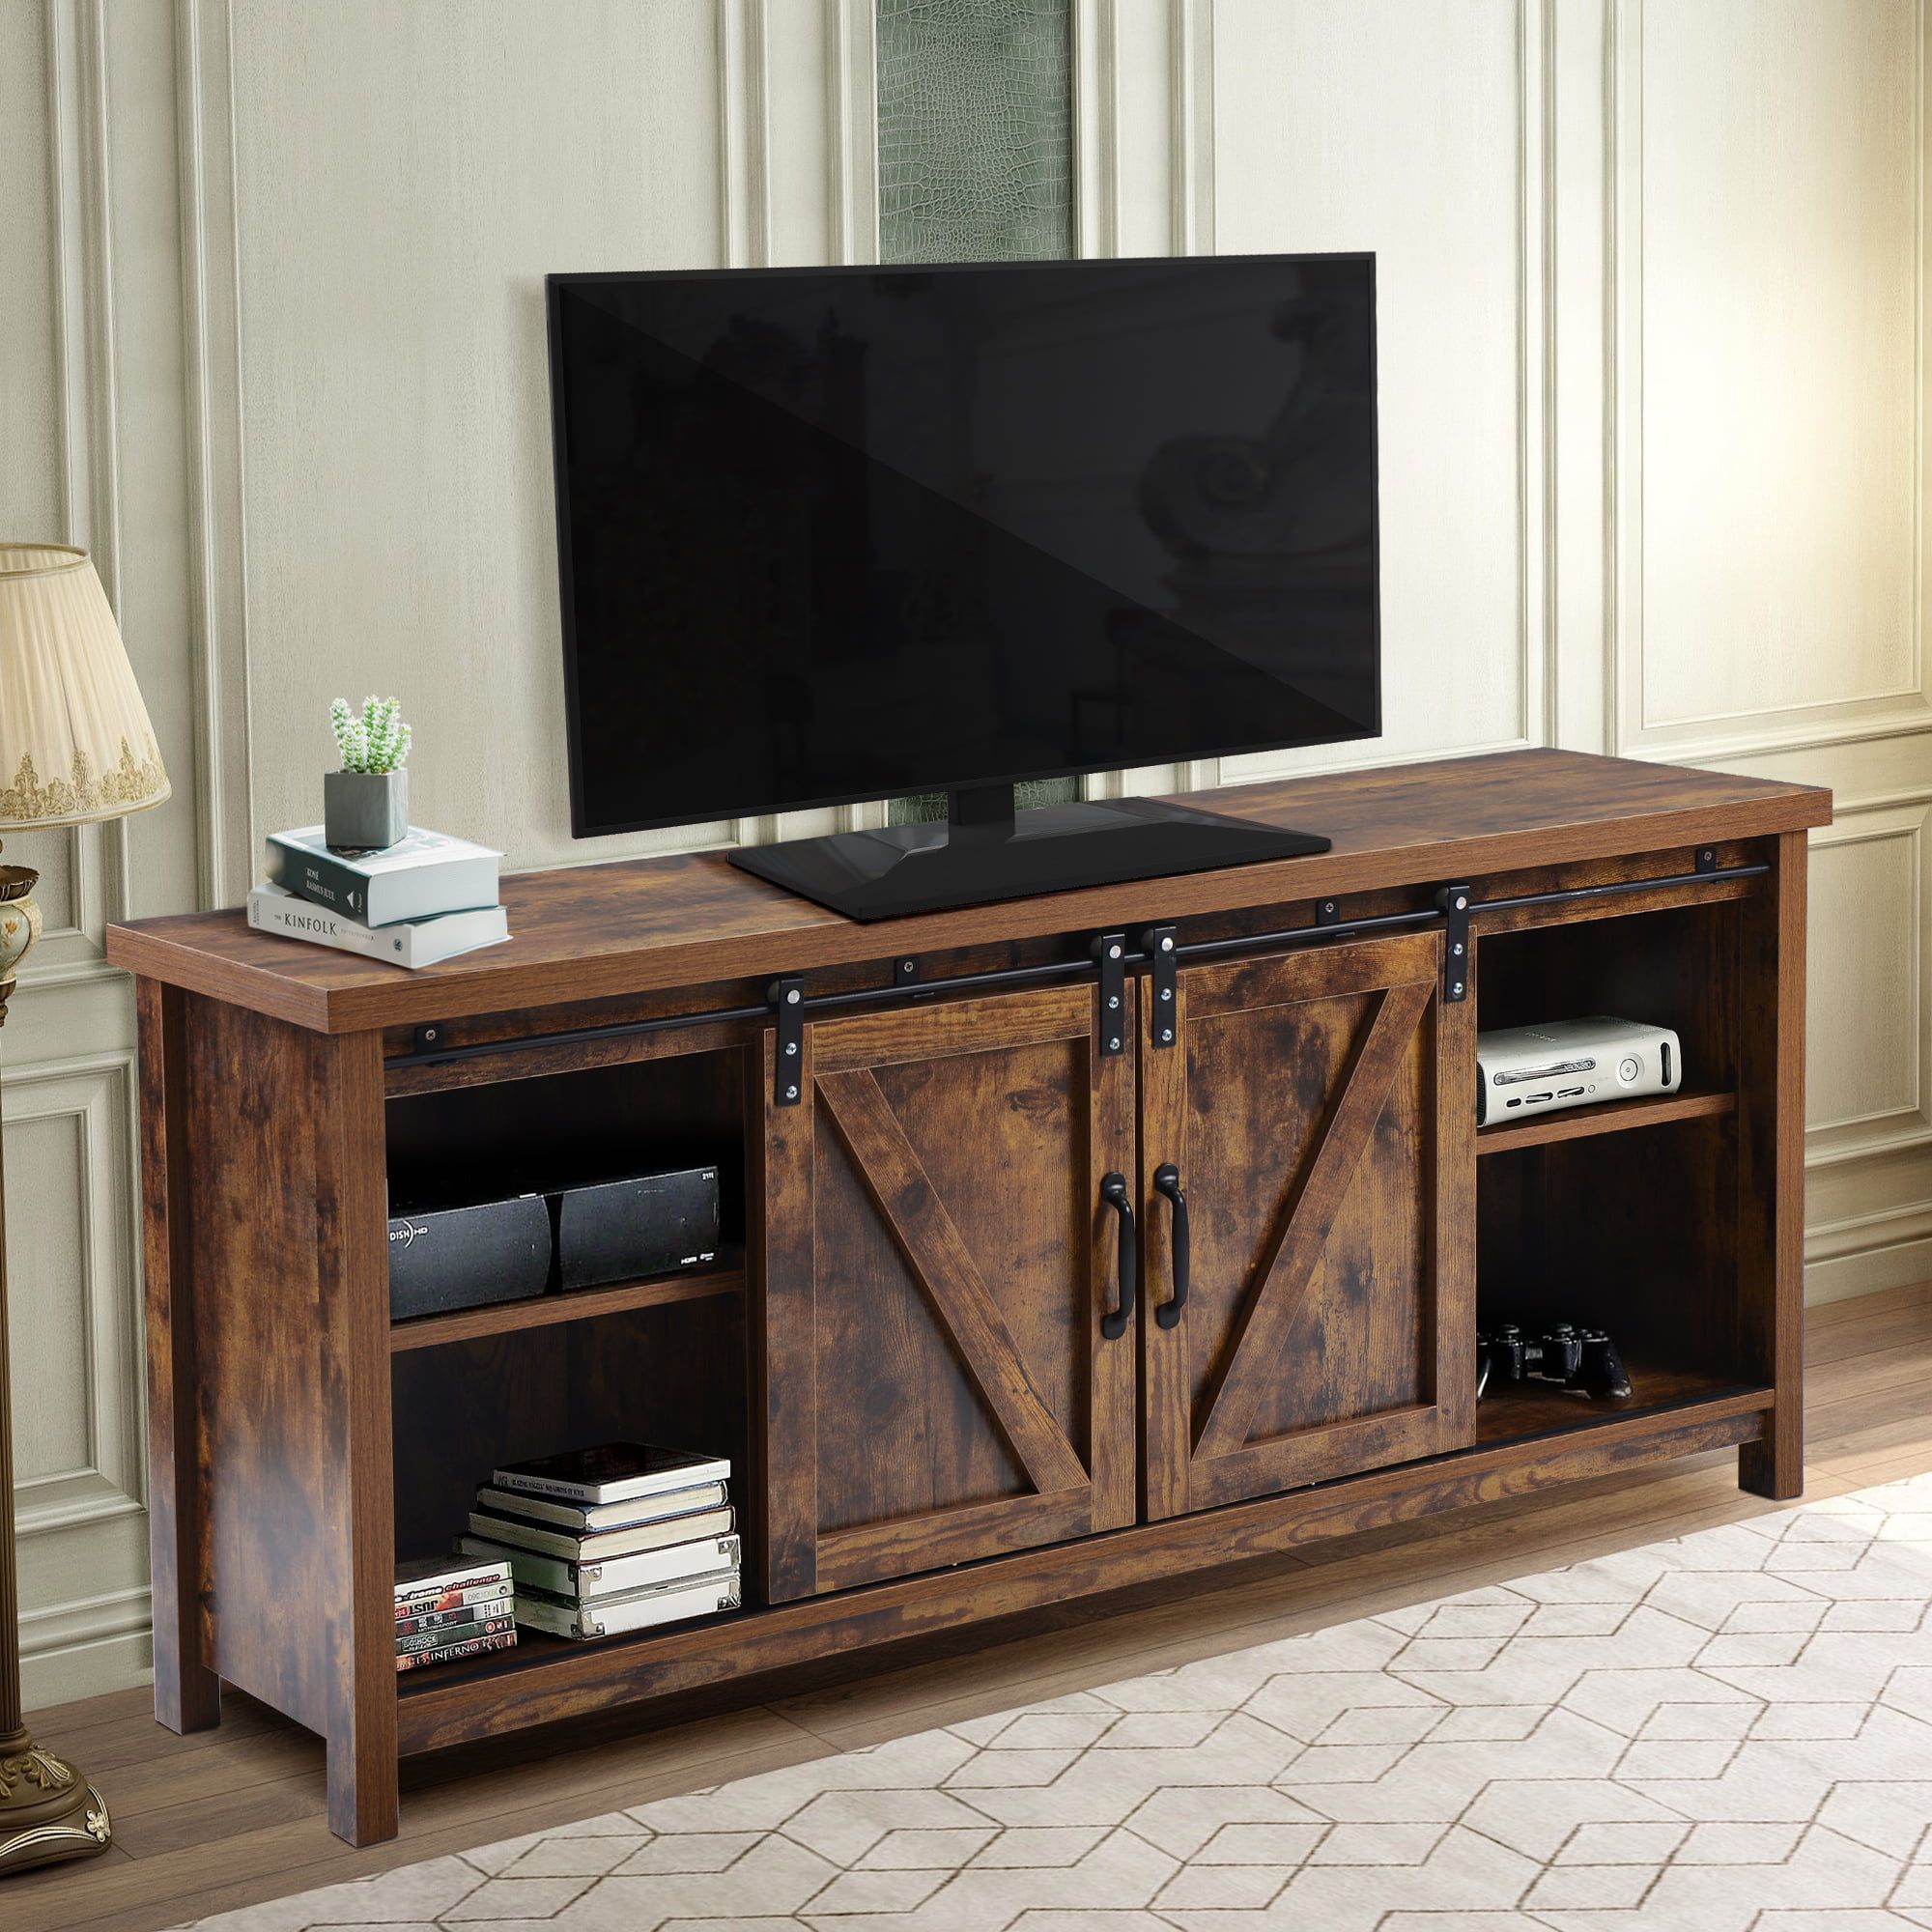 Buy Farmhouse 52'' Tv Stands With Adjustable Leg, Segmart Traditional Intended For Modern Farmhouse Rustic Tv Stands (View 15 of 20)